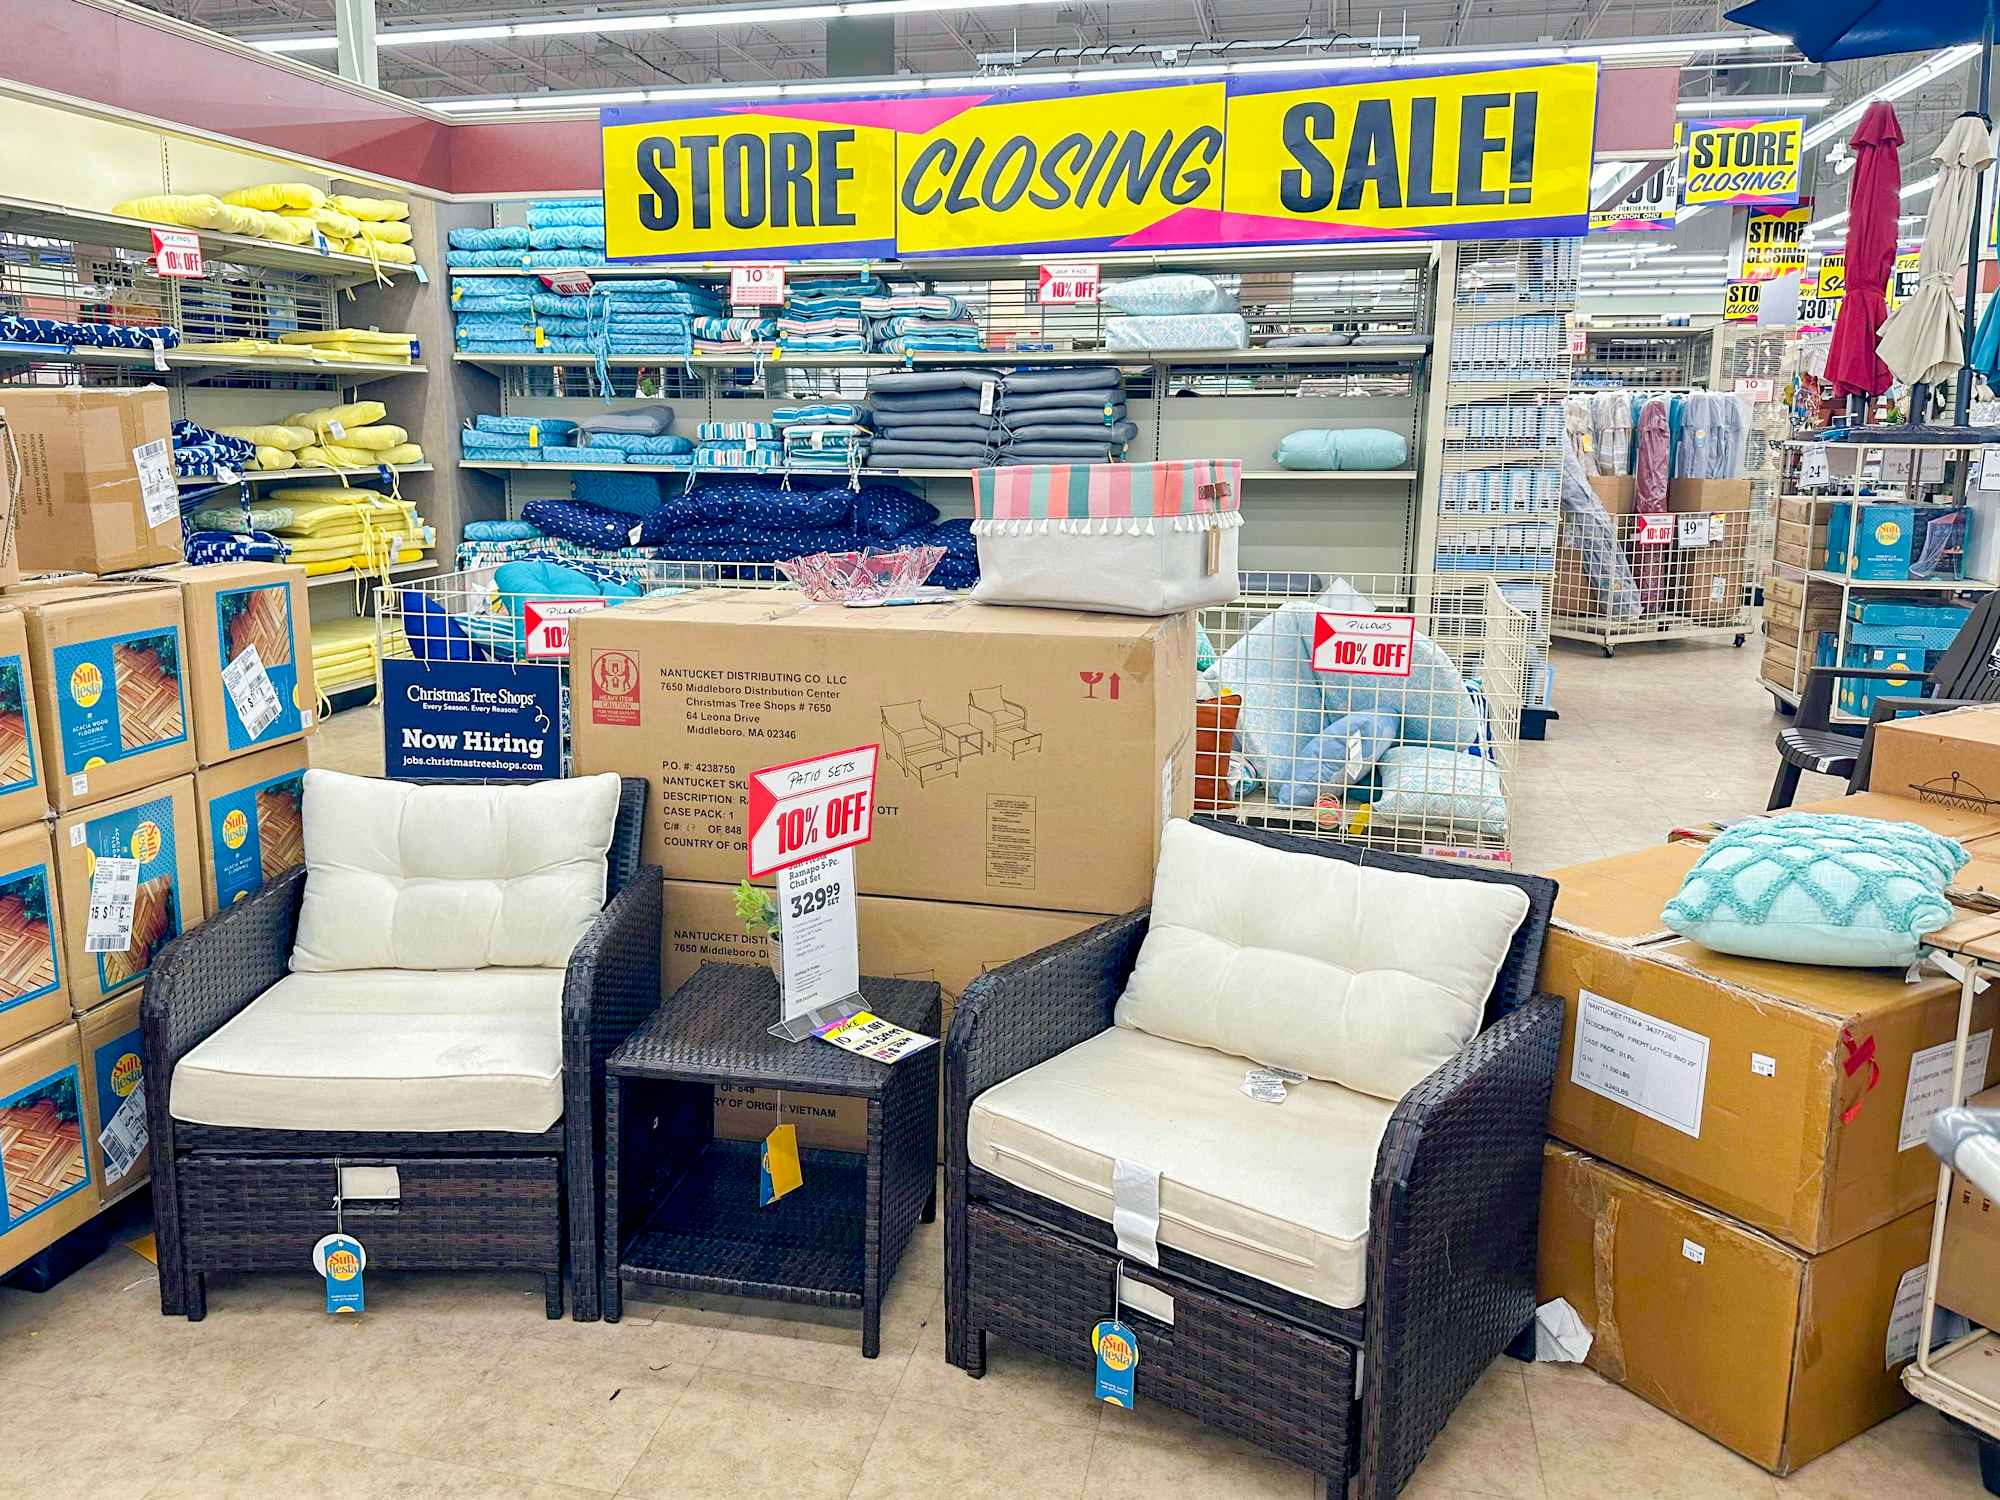 christmas tree shops with patio furniture and store closing sale signage